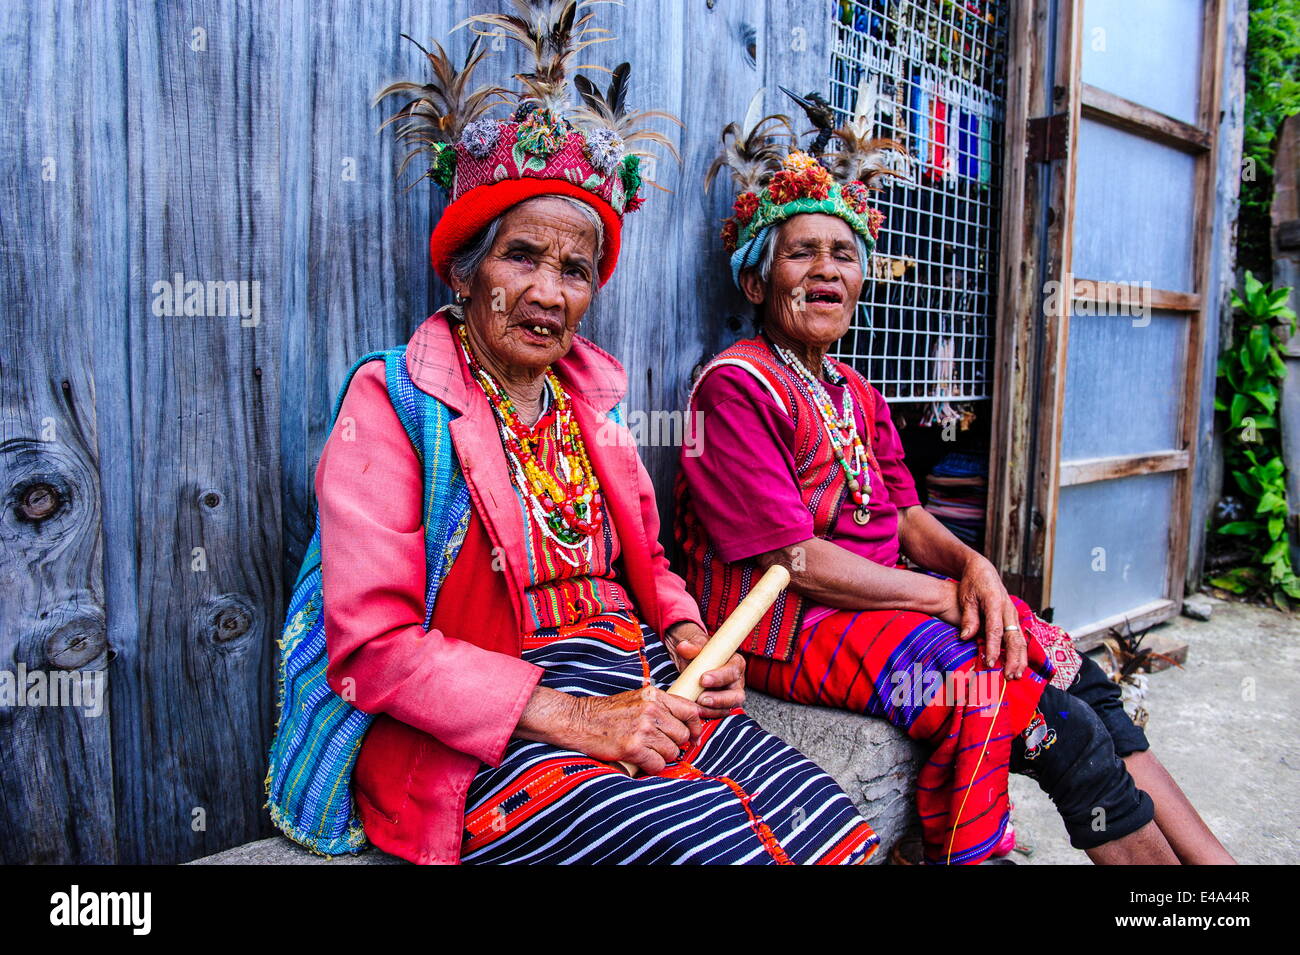 Traditional dressed Ifugao women sitting in Banaue, UNESCO, Northern Luzon, Philippines, Southeast Asia Stock Photo